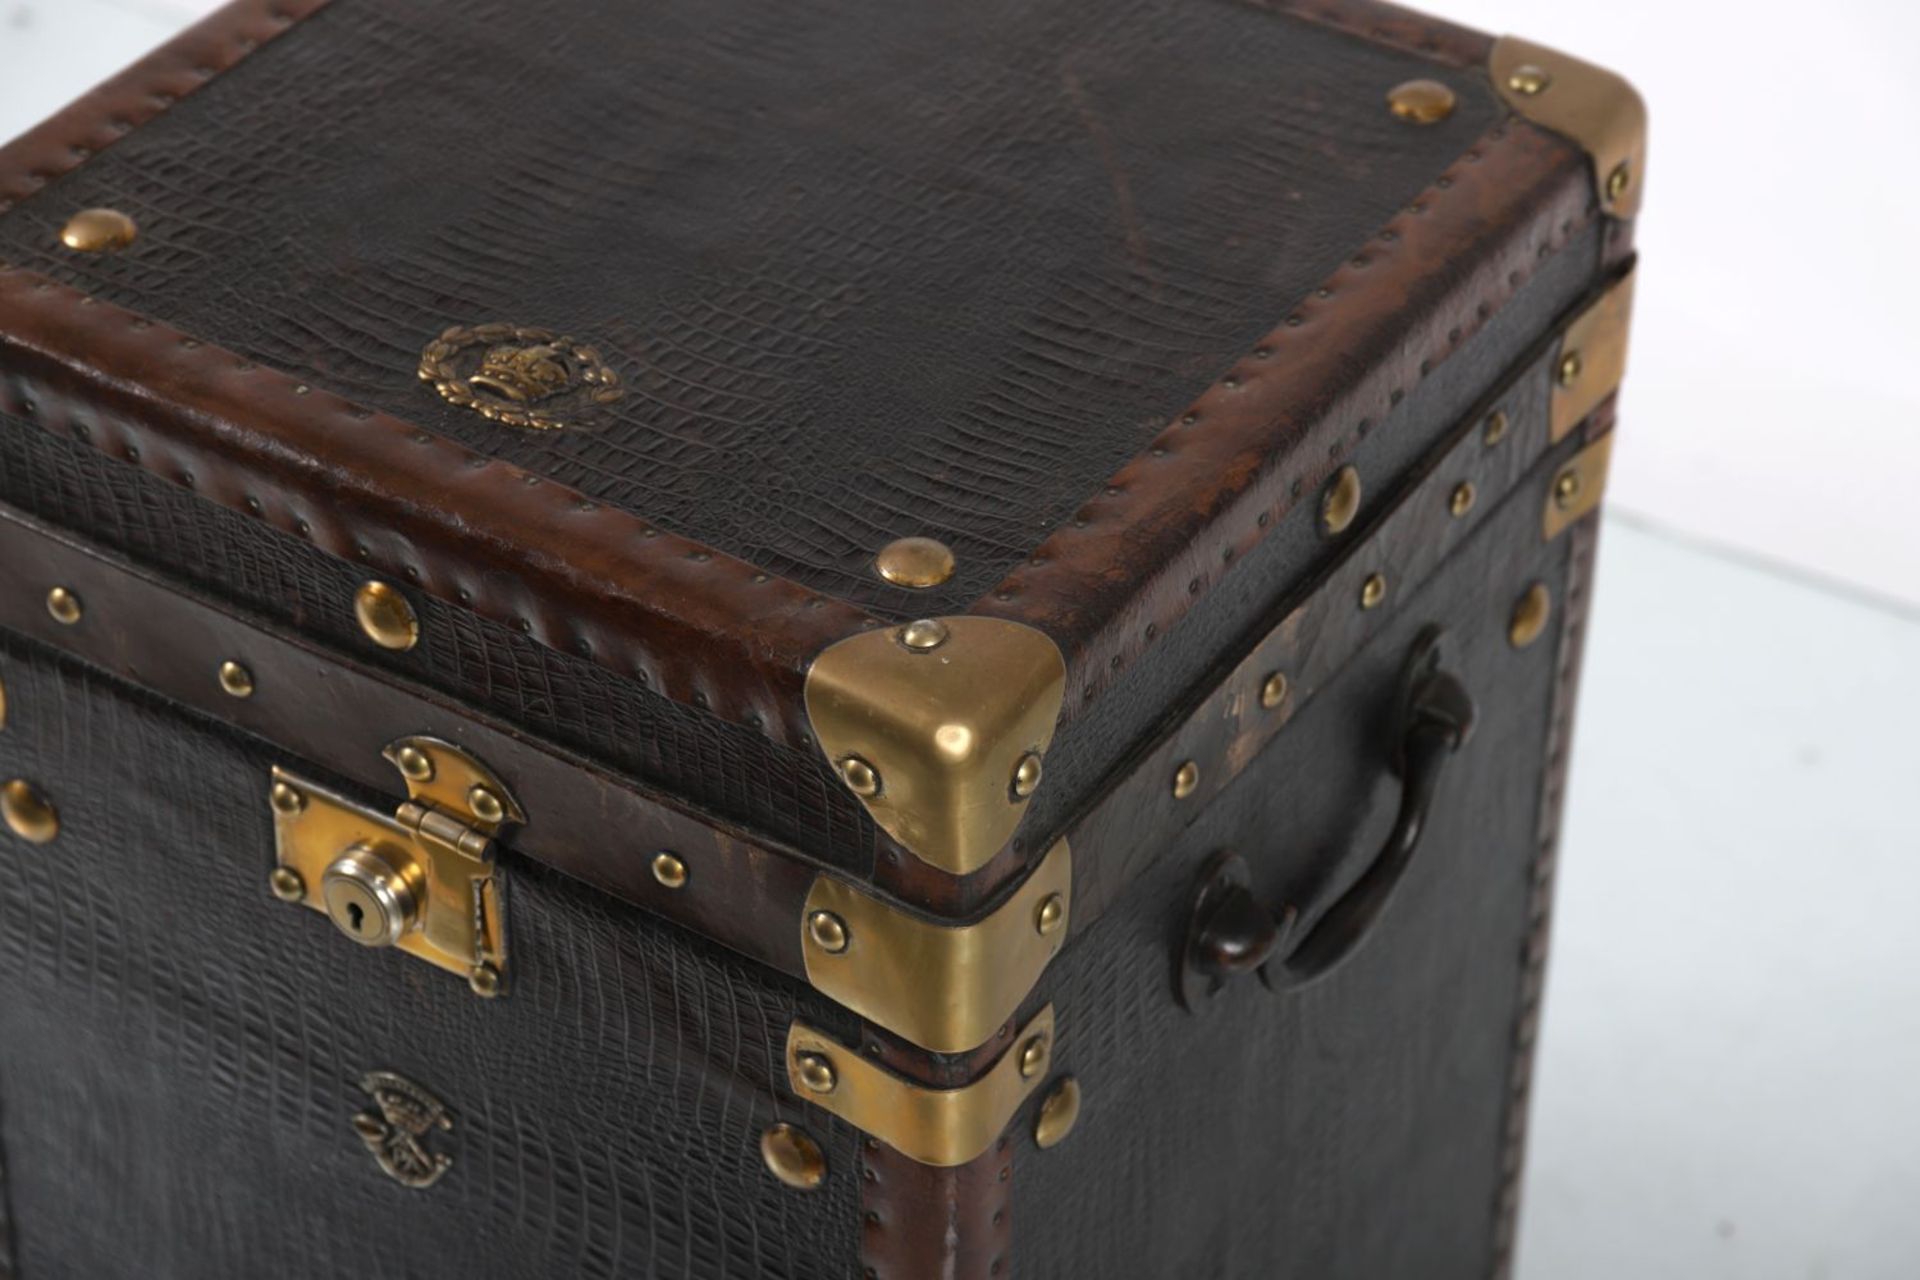 BRASS BOUND LEATHER TRUNK - Image 2 of 3